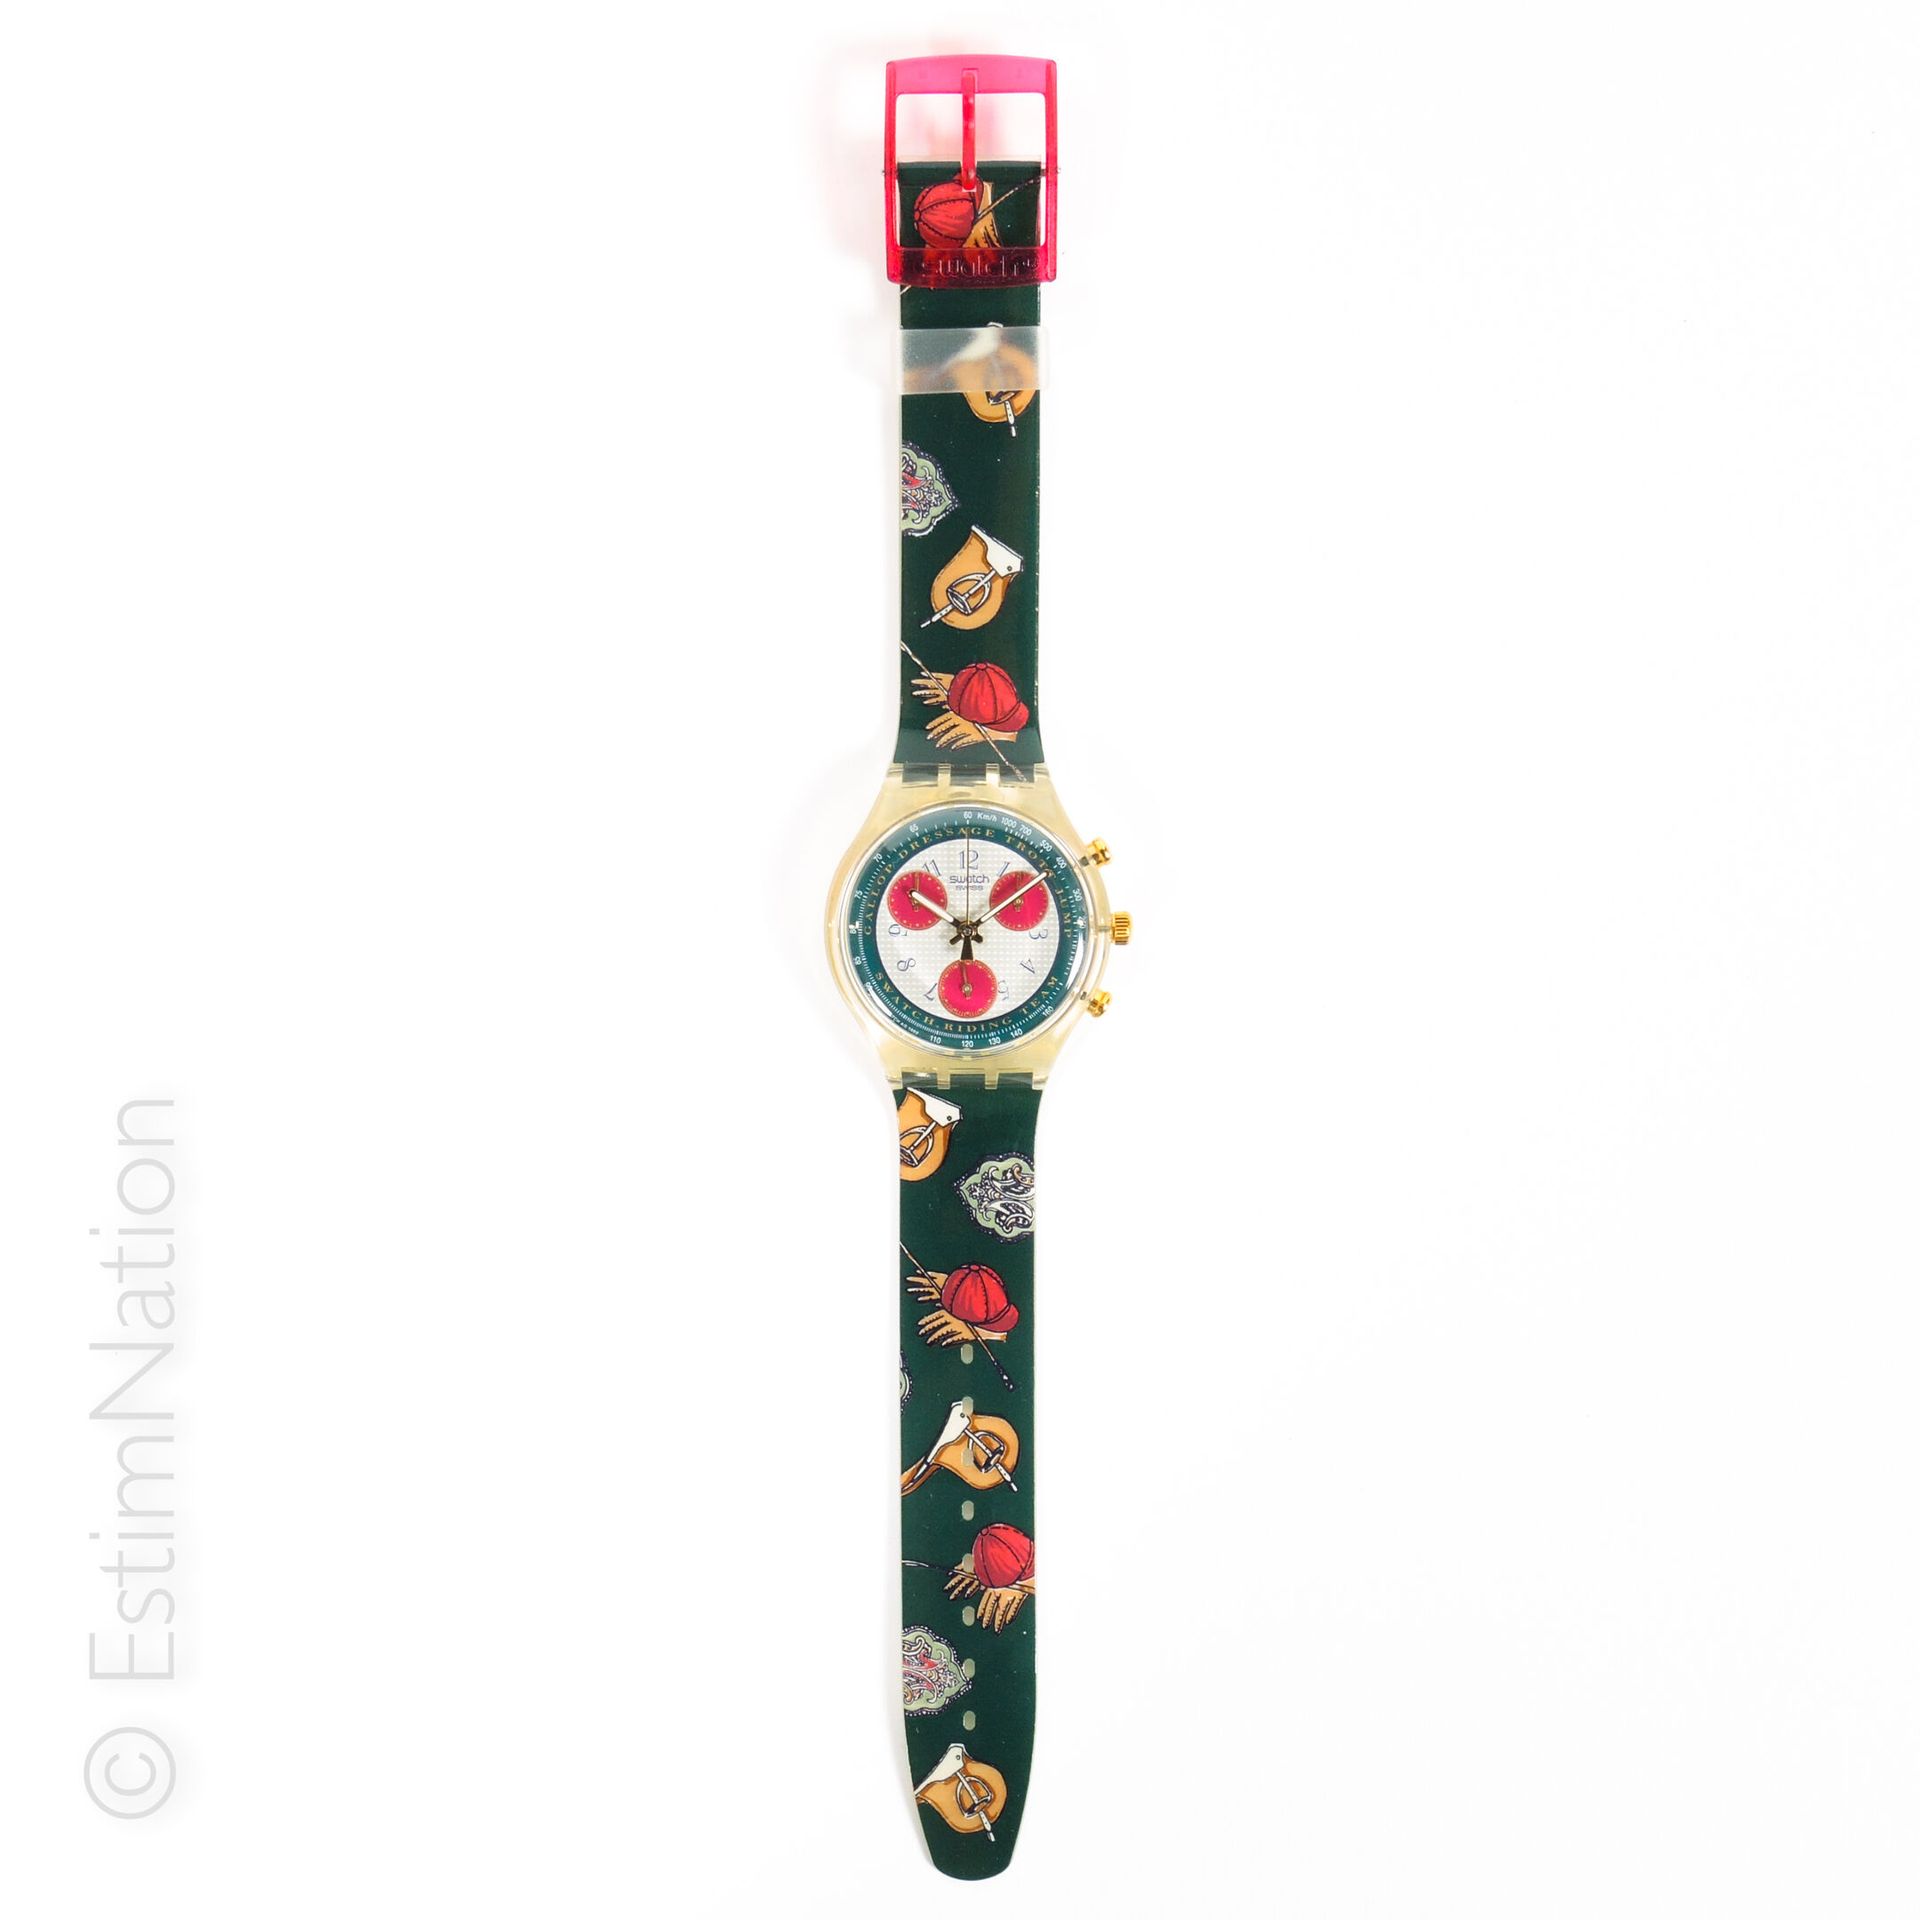 SWATCH - RIDING STAR - 1993 SWATCH - RIDING STAR

Plastic collection : Chrono


&hellip;